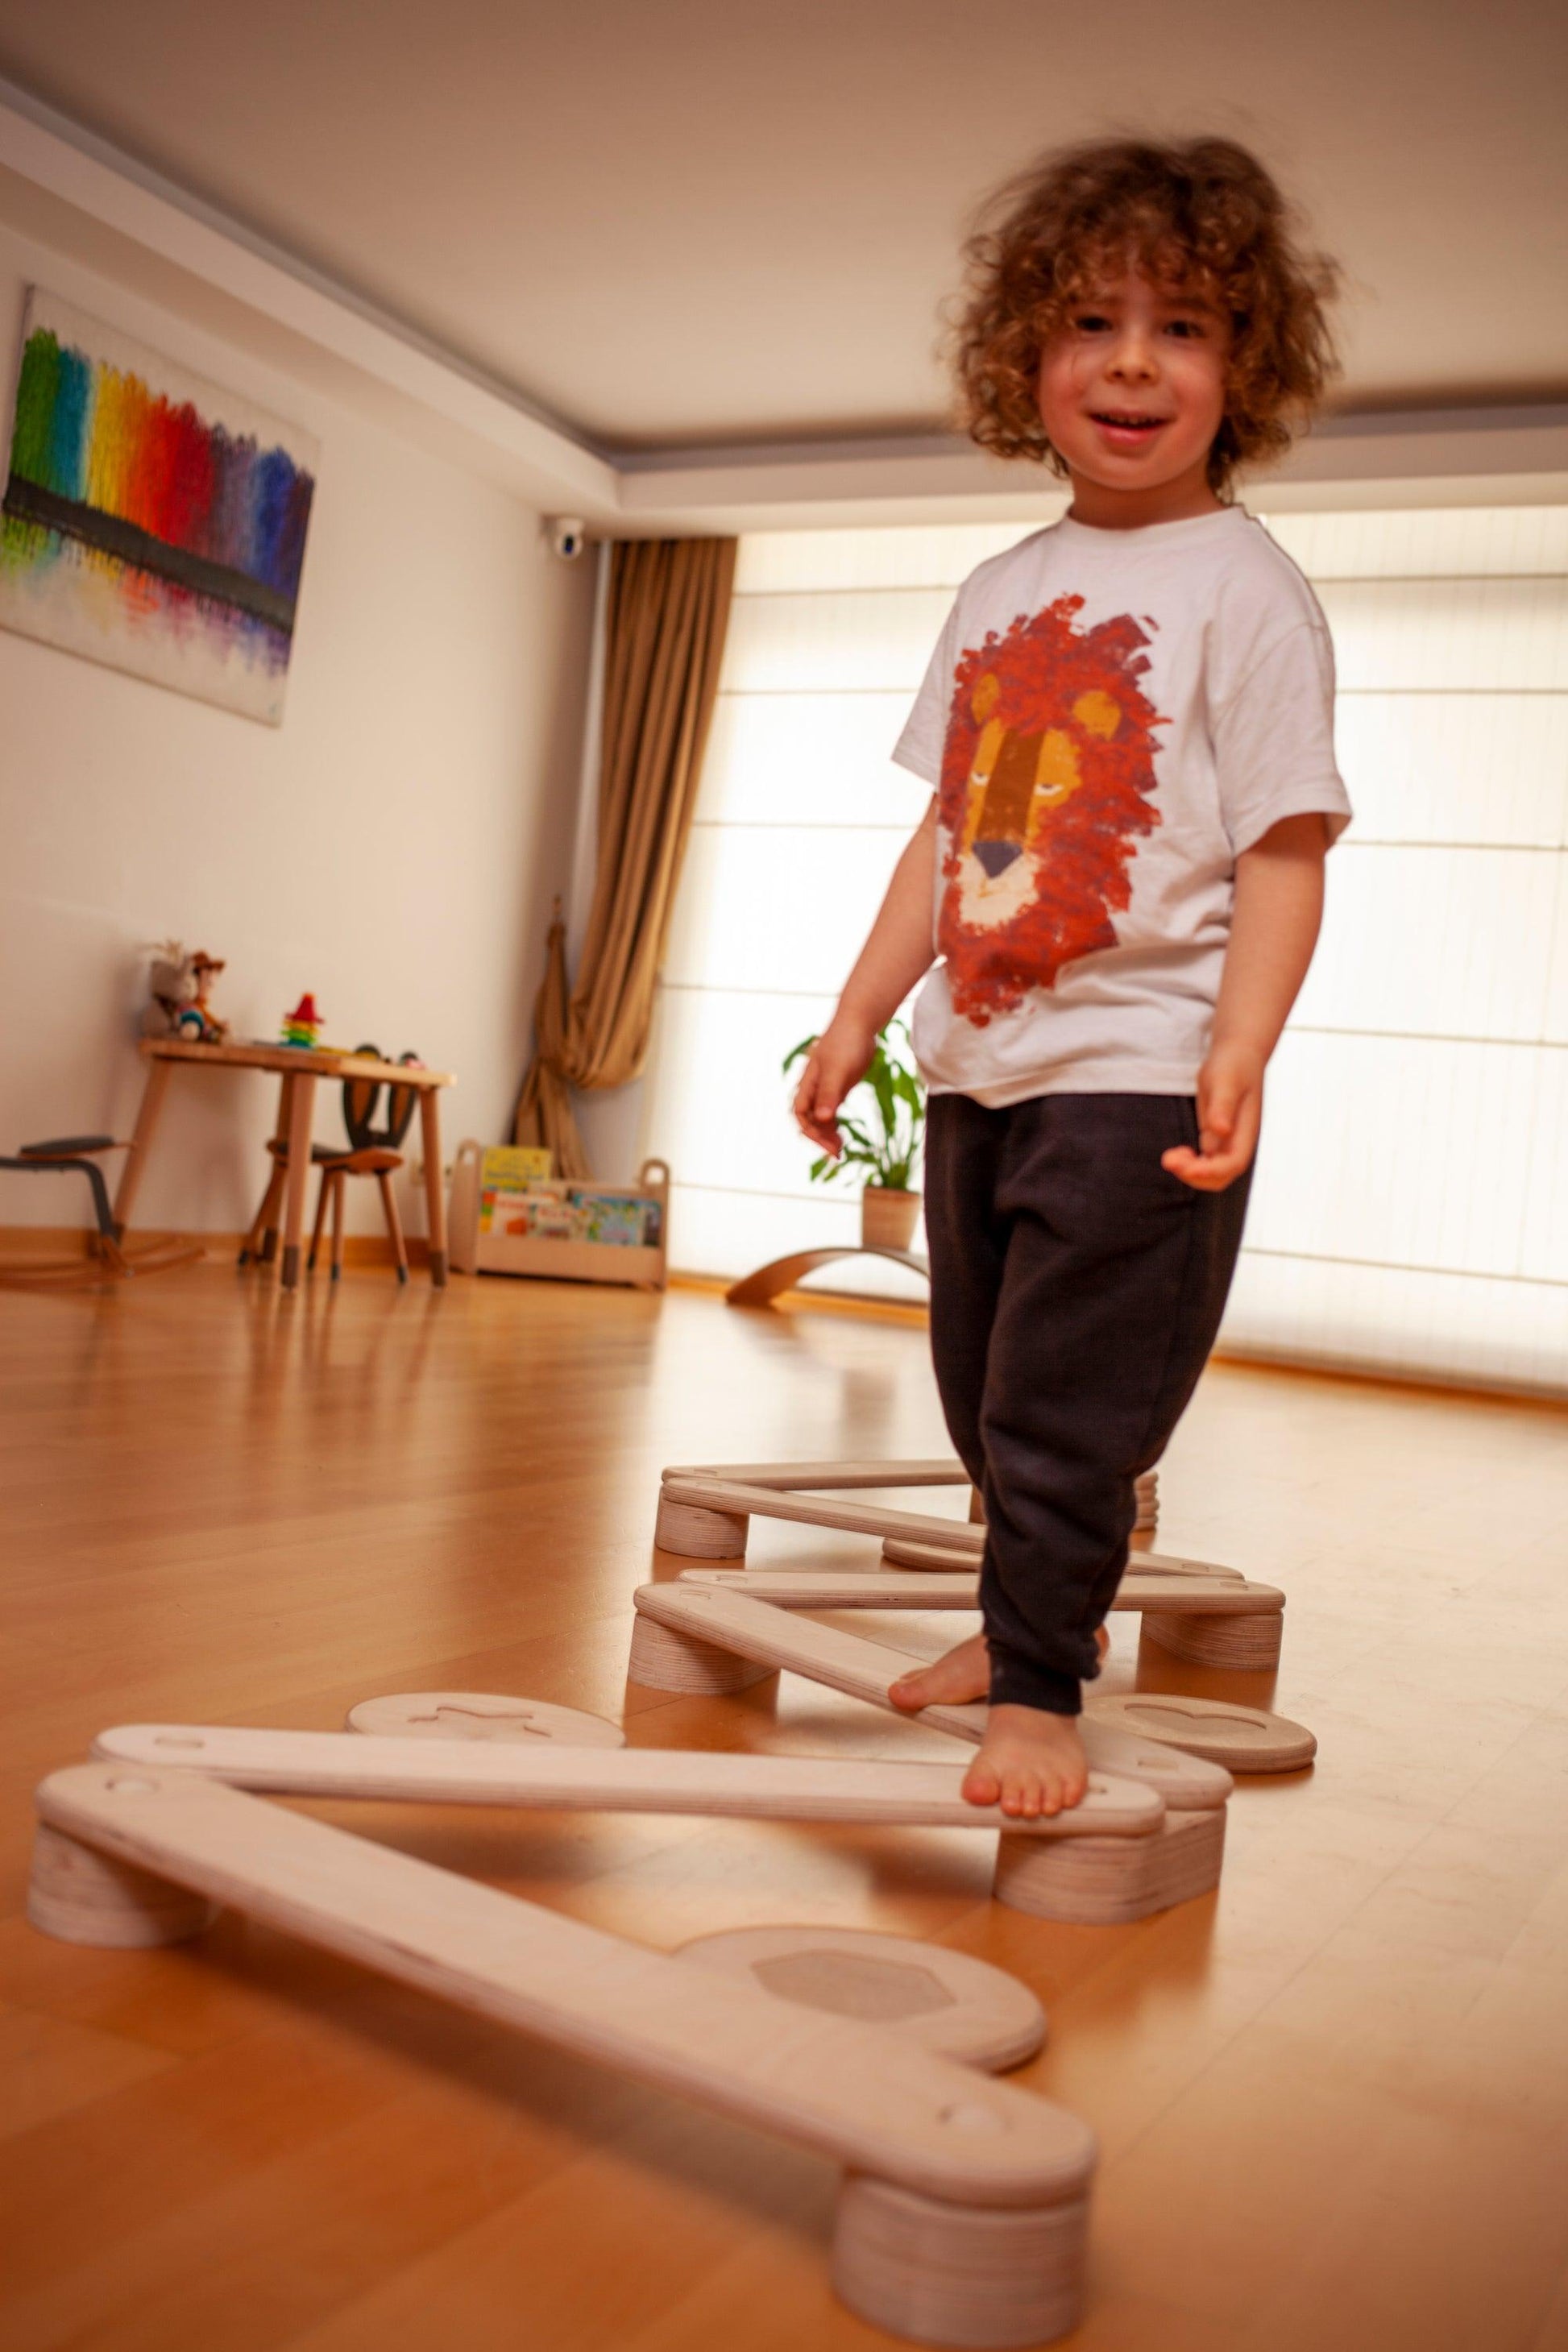 Wooden Balance Beam and Stepping Stones Set with Increased Safety and Improved Design - ToylandEU